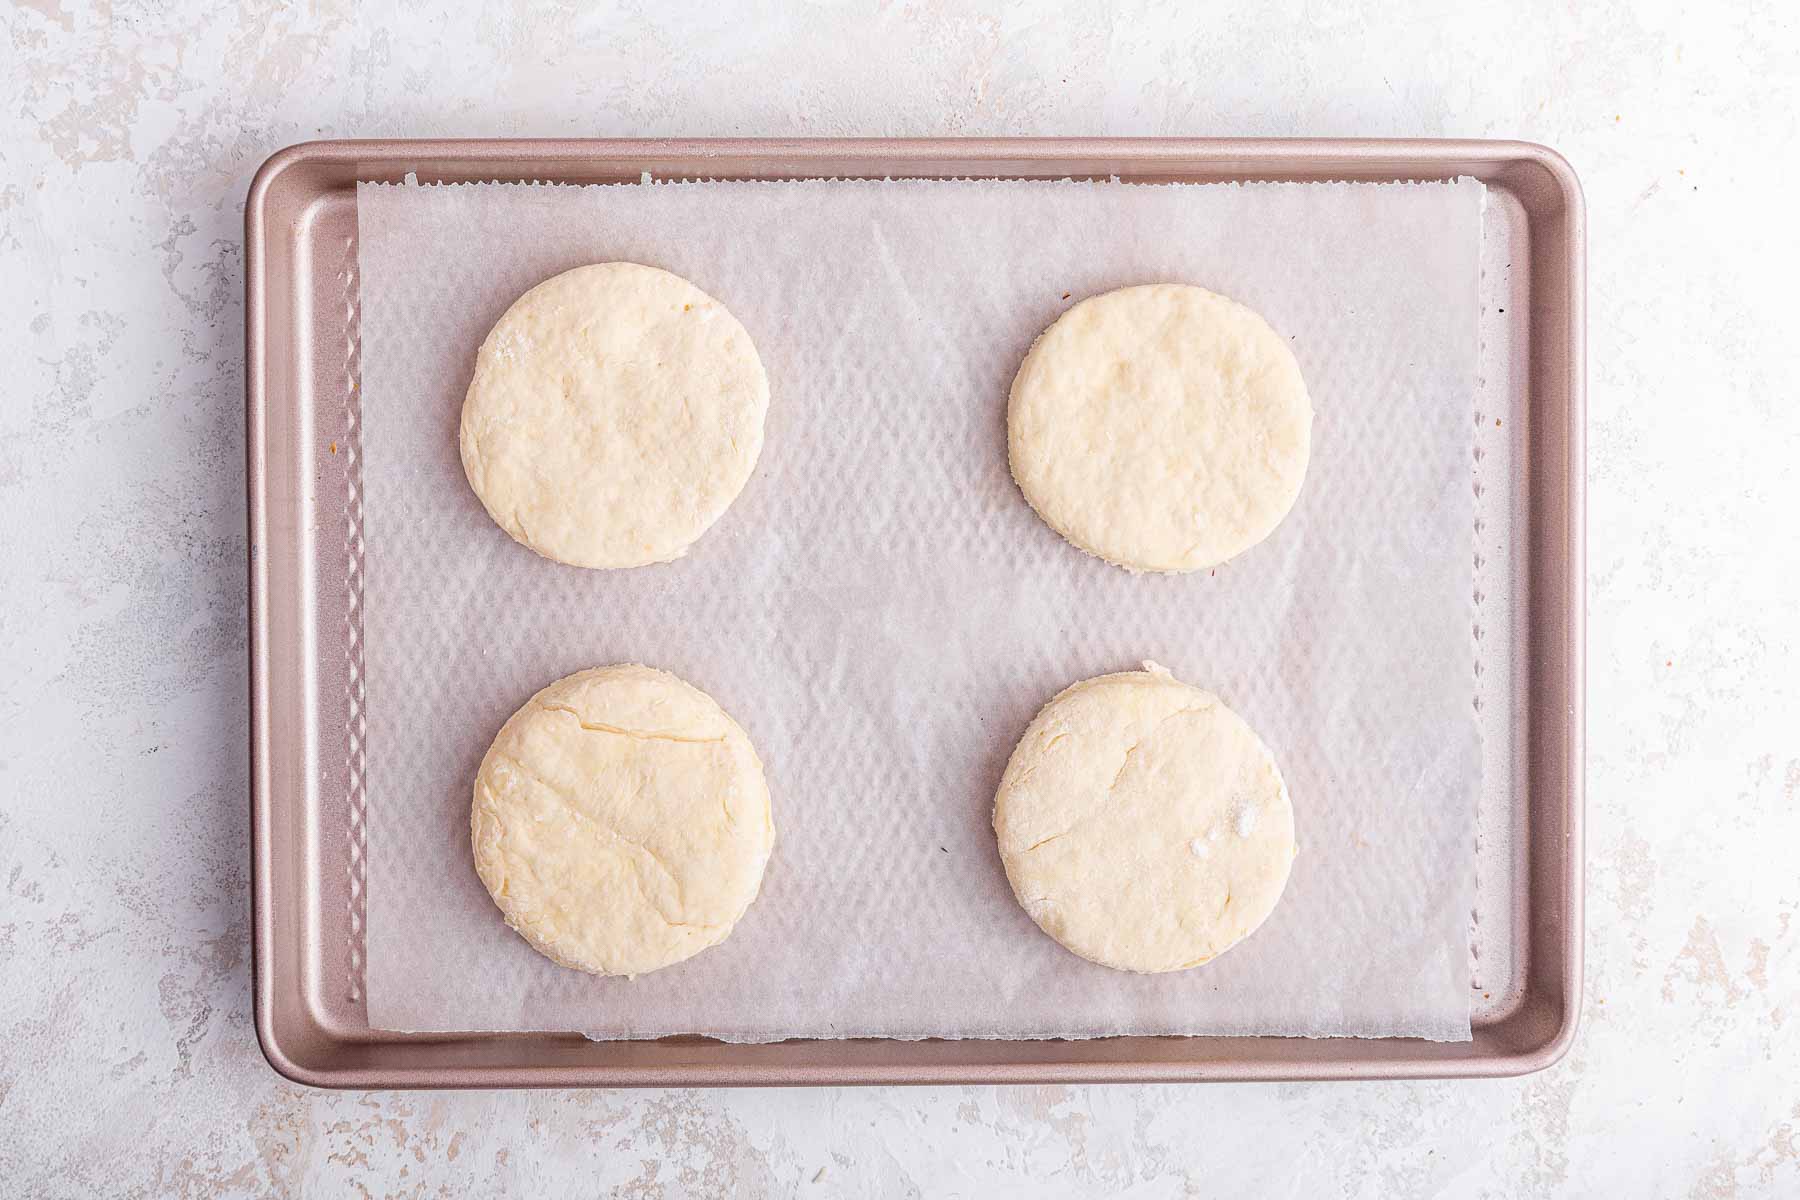 Four biscuits on mini sheet pan, pre-baking.